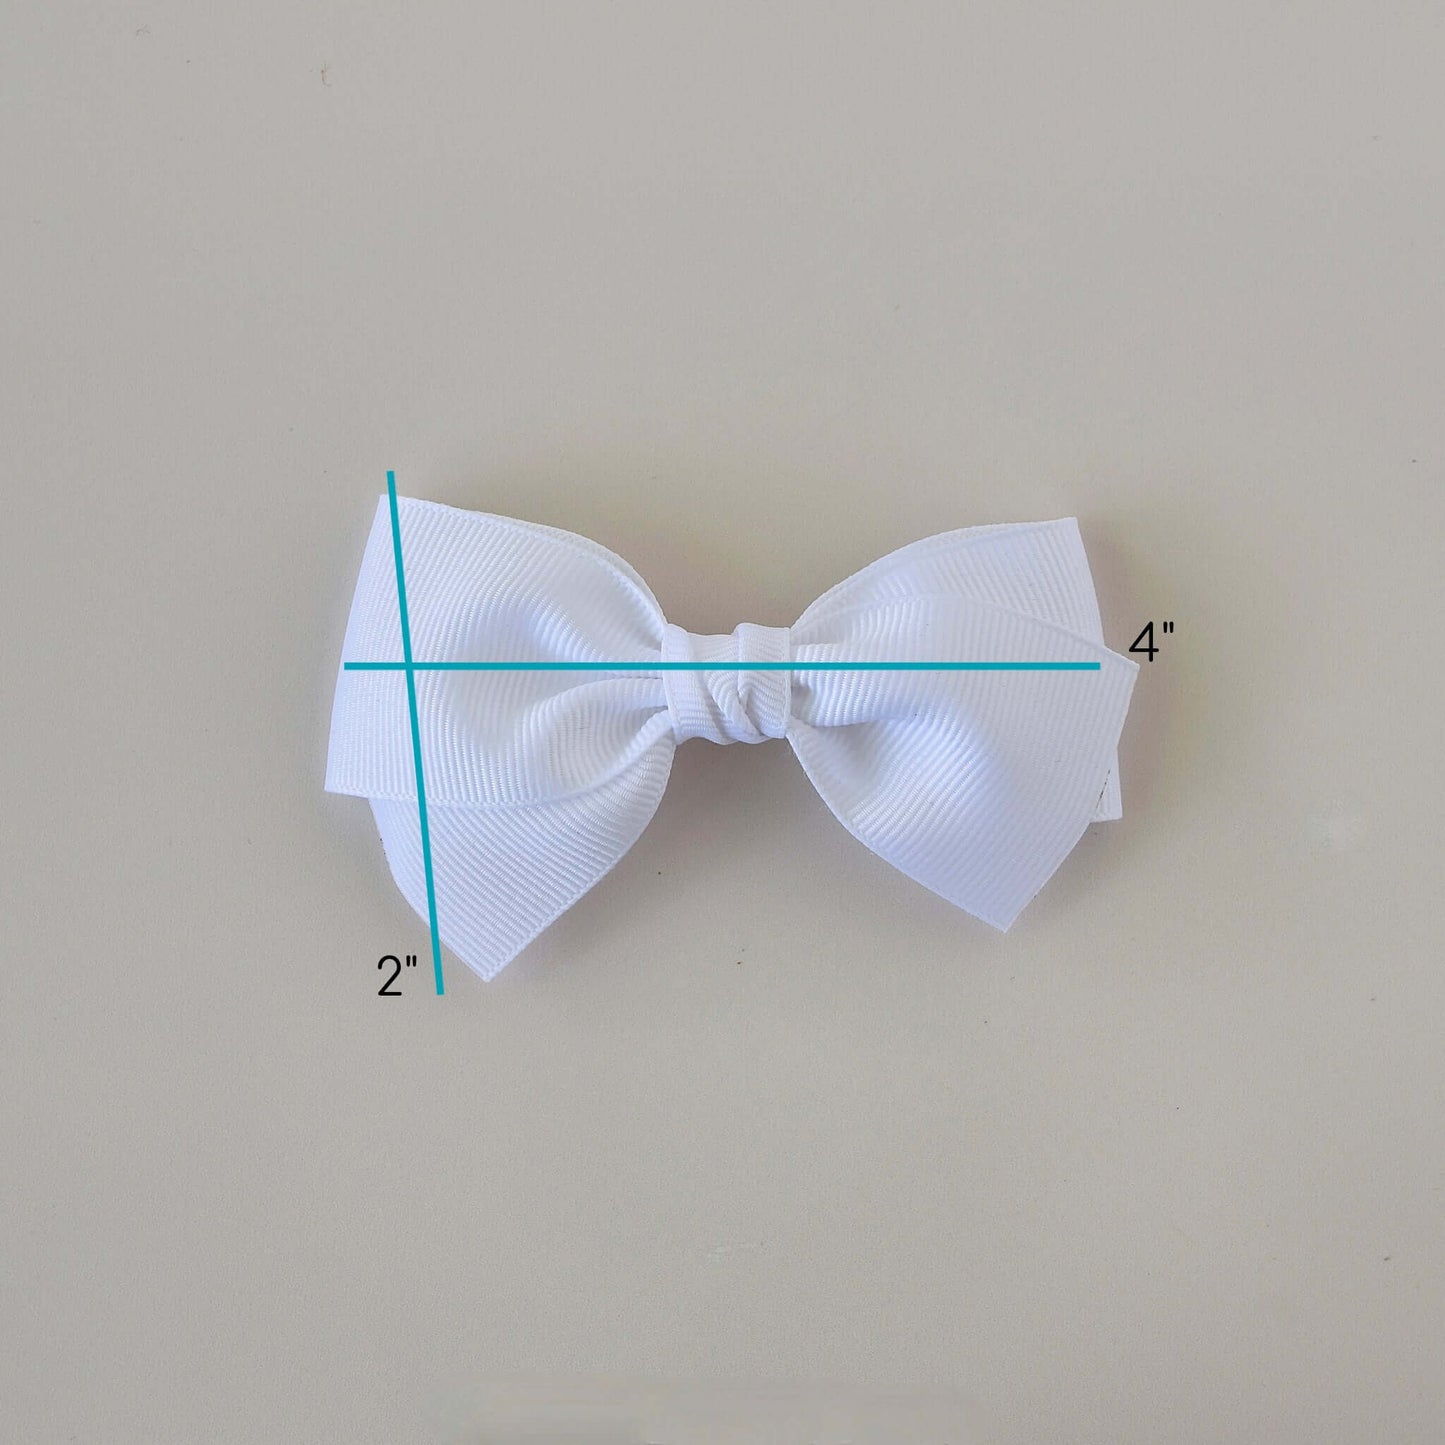 4 inch white grosgrain baby Kayla bow clip showing dimensions, perfect for toddlers and newborns, versatile accessory for headbands or clips